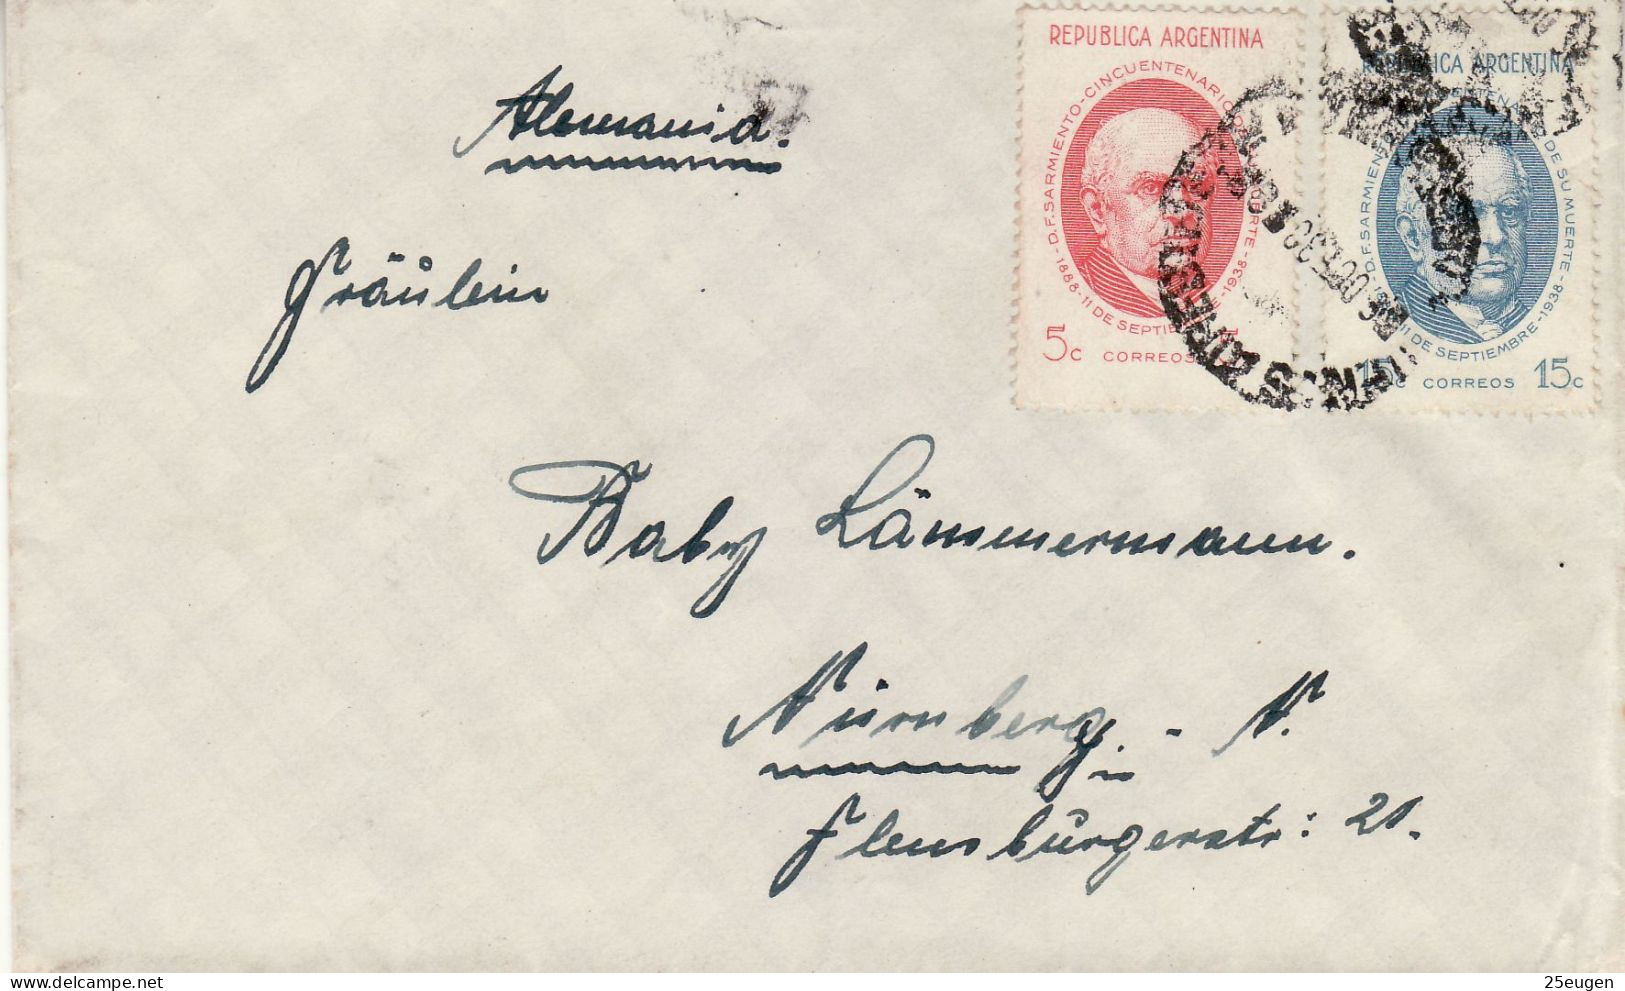 ARGENTINA 1938 LETTER SENT FROM BUENOS AIRES TO NUERNBERG - Covers & Documents